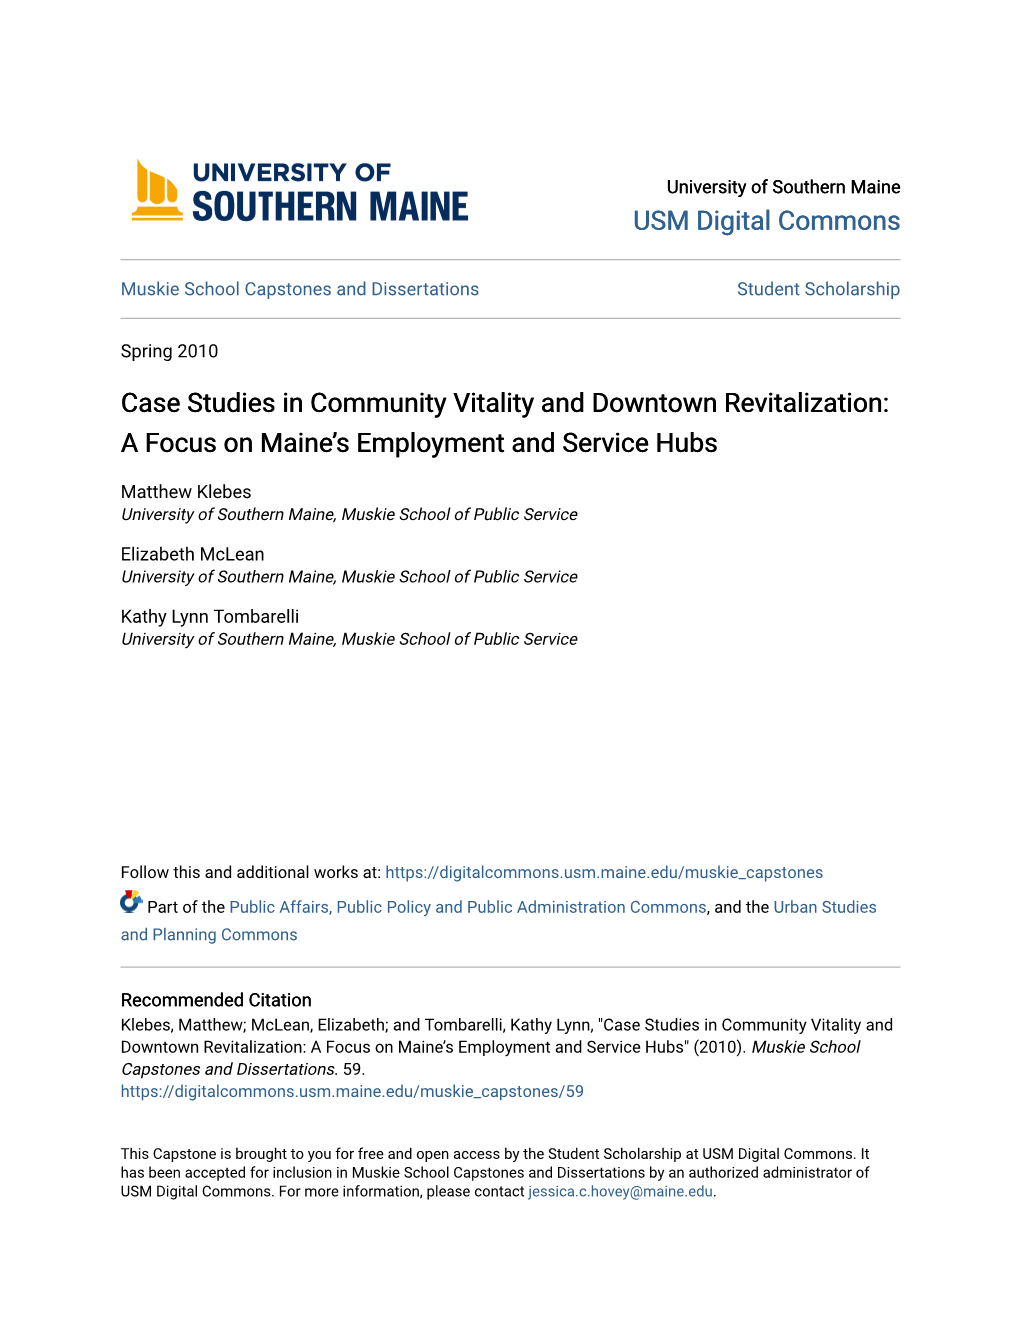 Case Studies in Community Vitality and Downtown Revitalization: a Focus on Maine’S Employment and Service Hubs